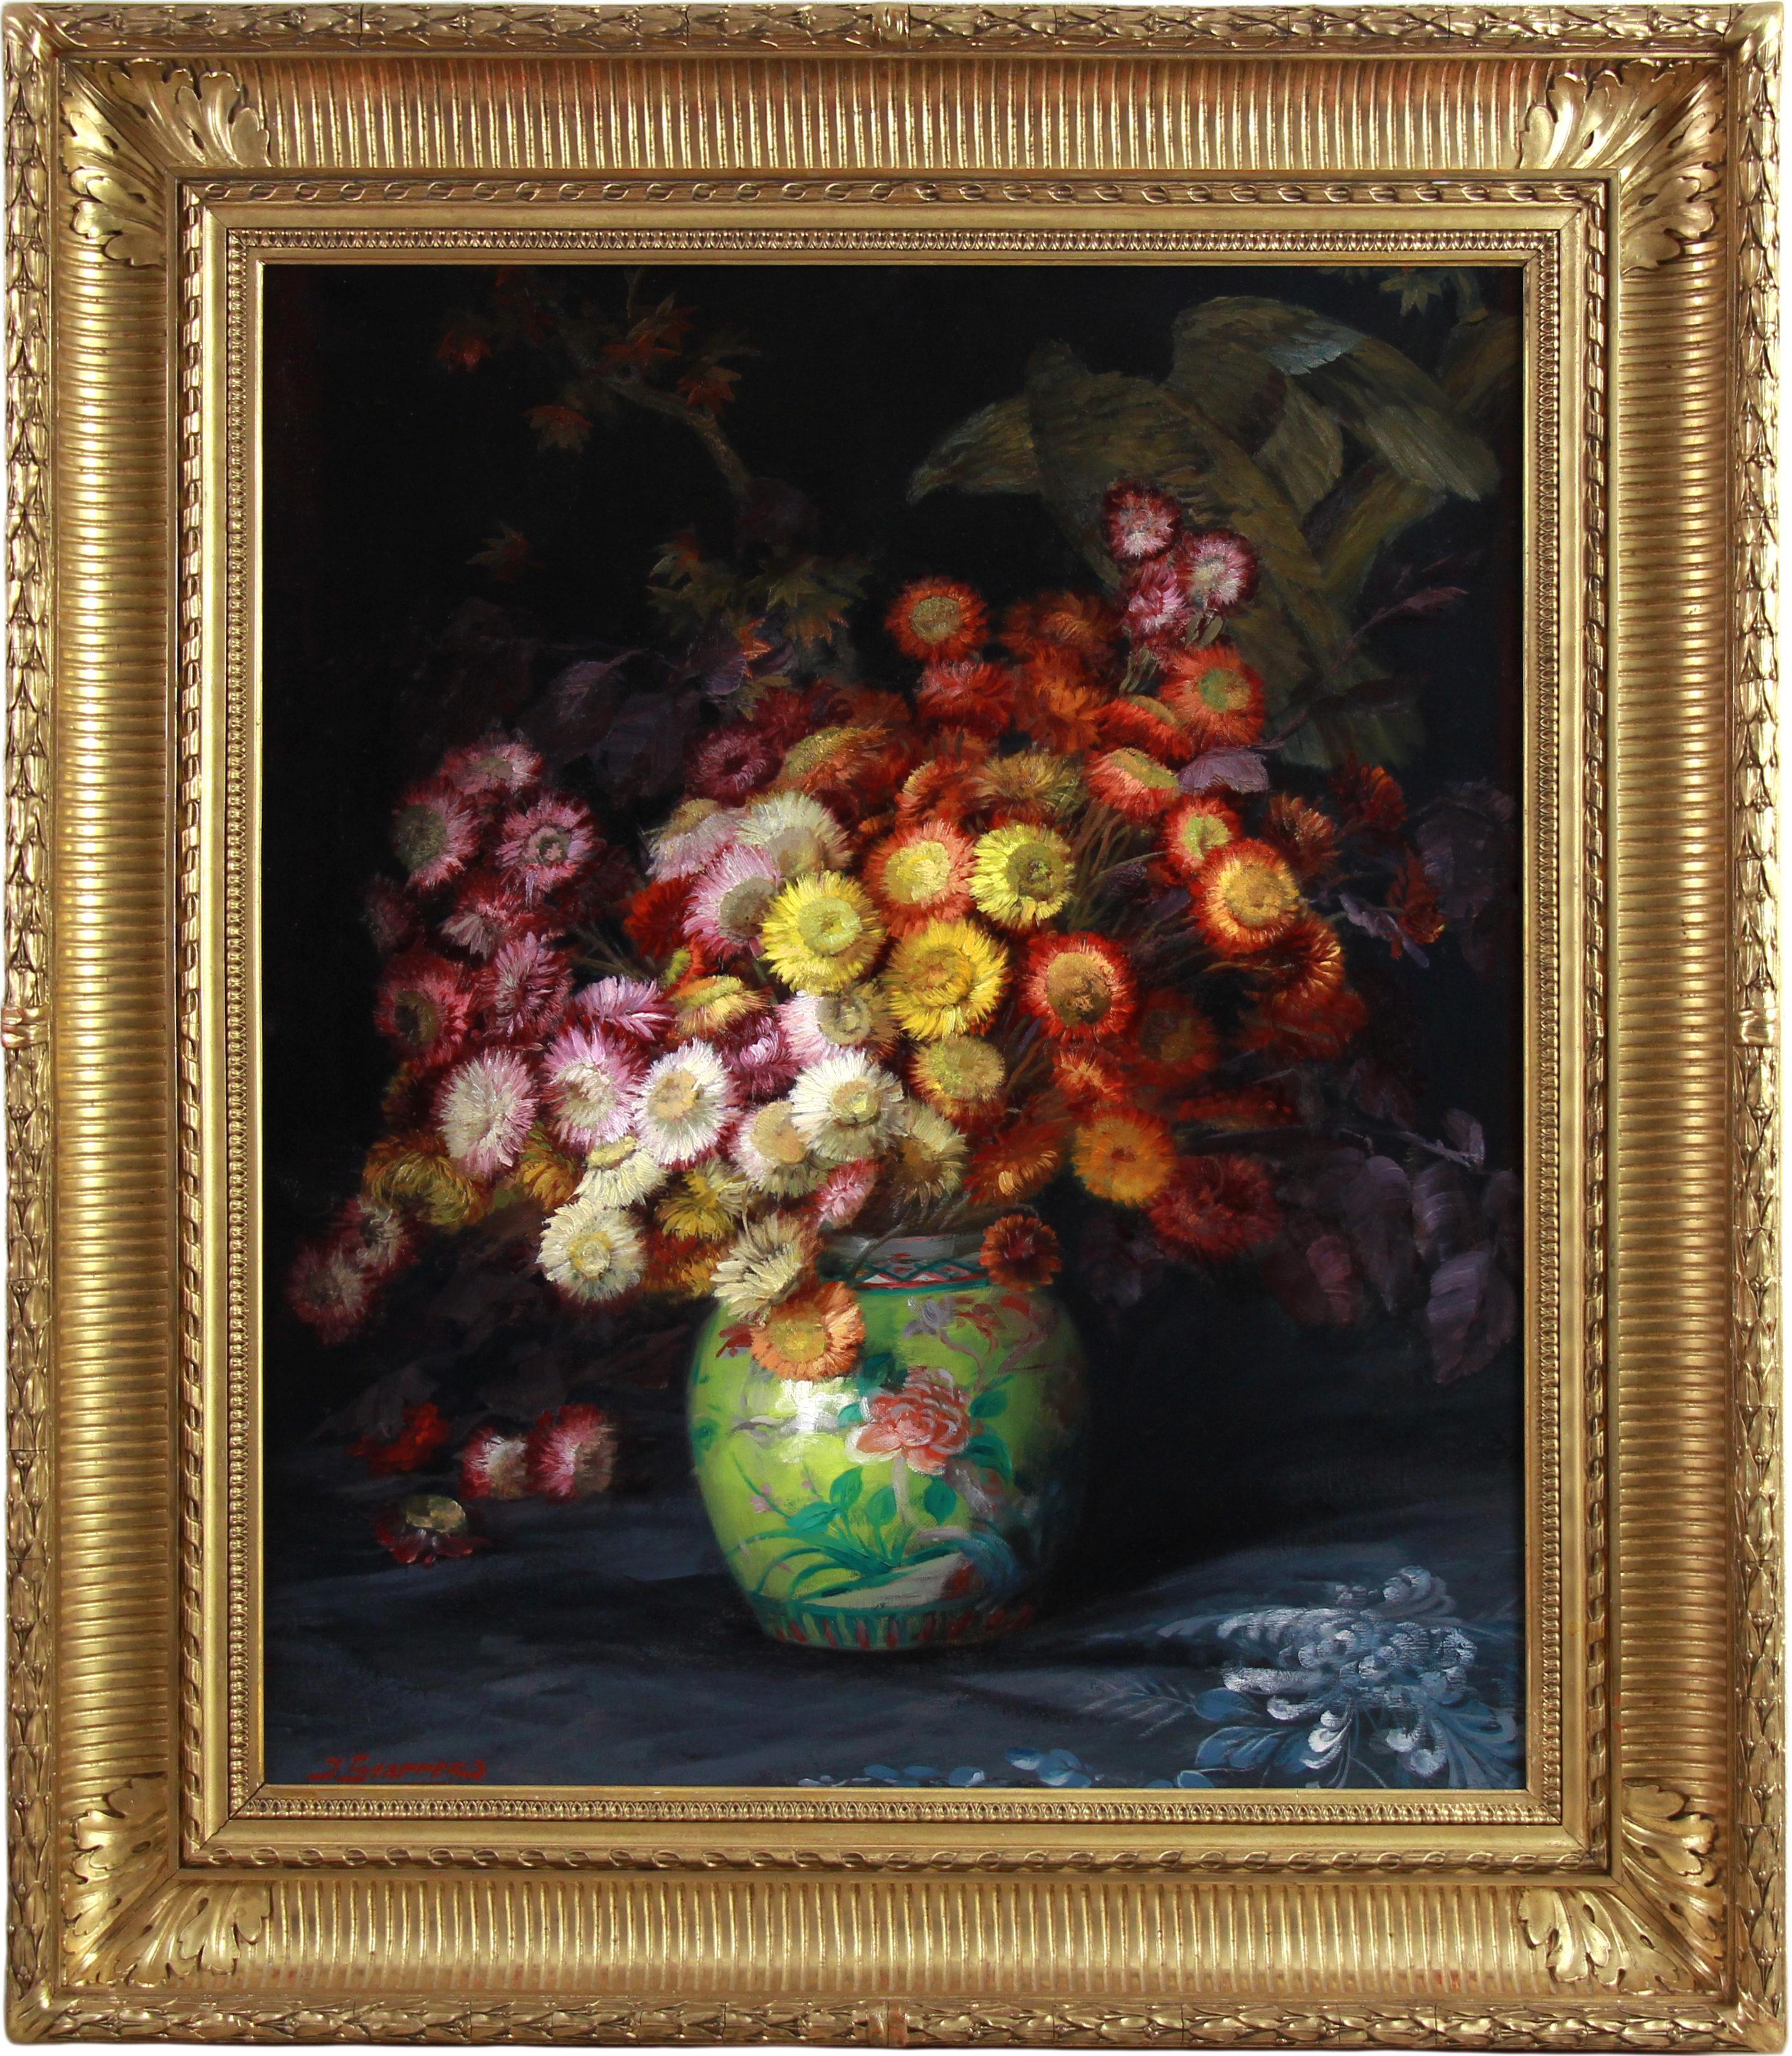 Oil On Canvas "Still life with flowers and Chinese vase" By Julien Stappers

Biography:

Julien Stappers was a Belgian painter who was born in 1875.
Stappers's work has been offered at auction multiple times, with realized prices ranging up to $